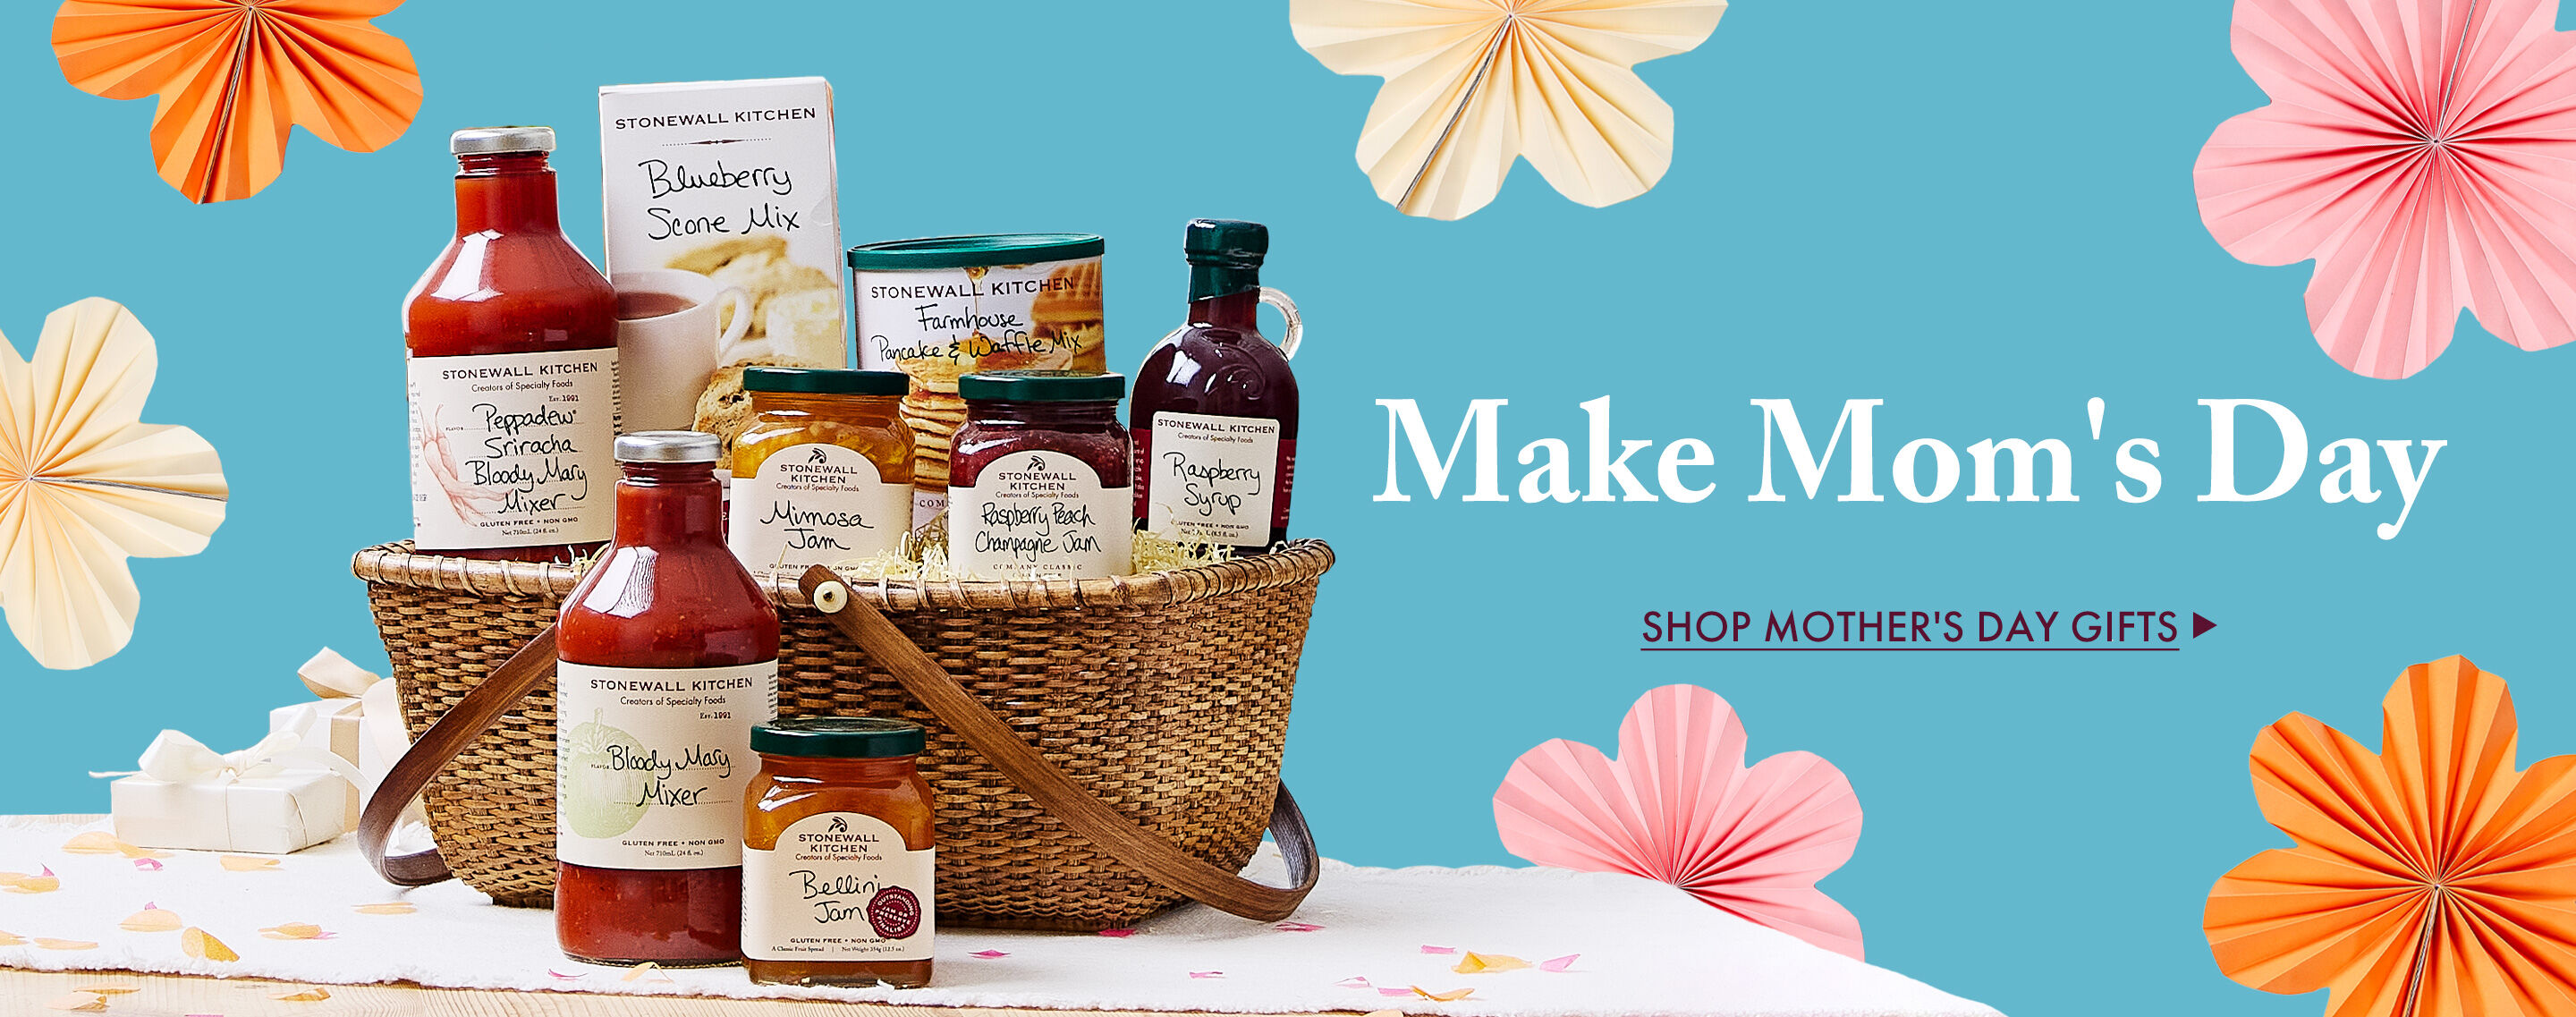 Make Mom's Day - Shop Mother's Day Gifts